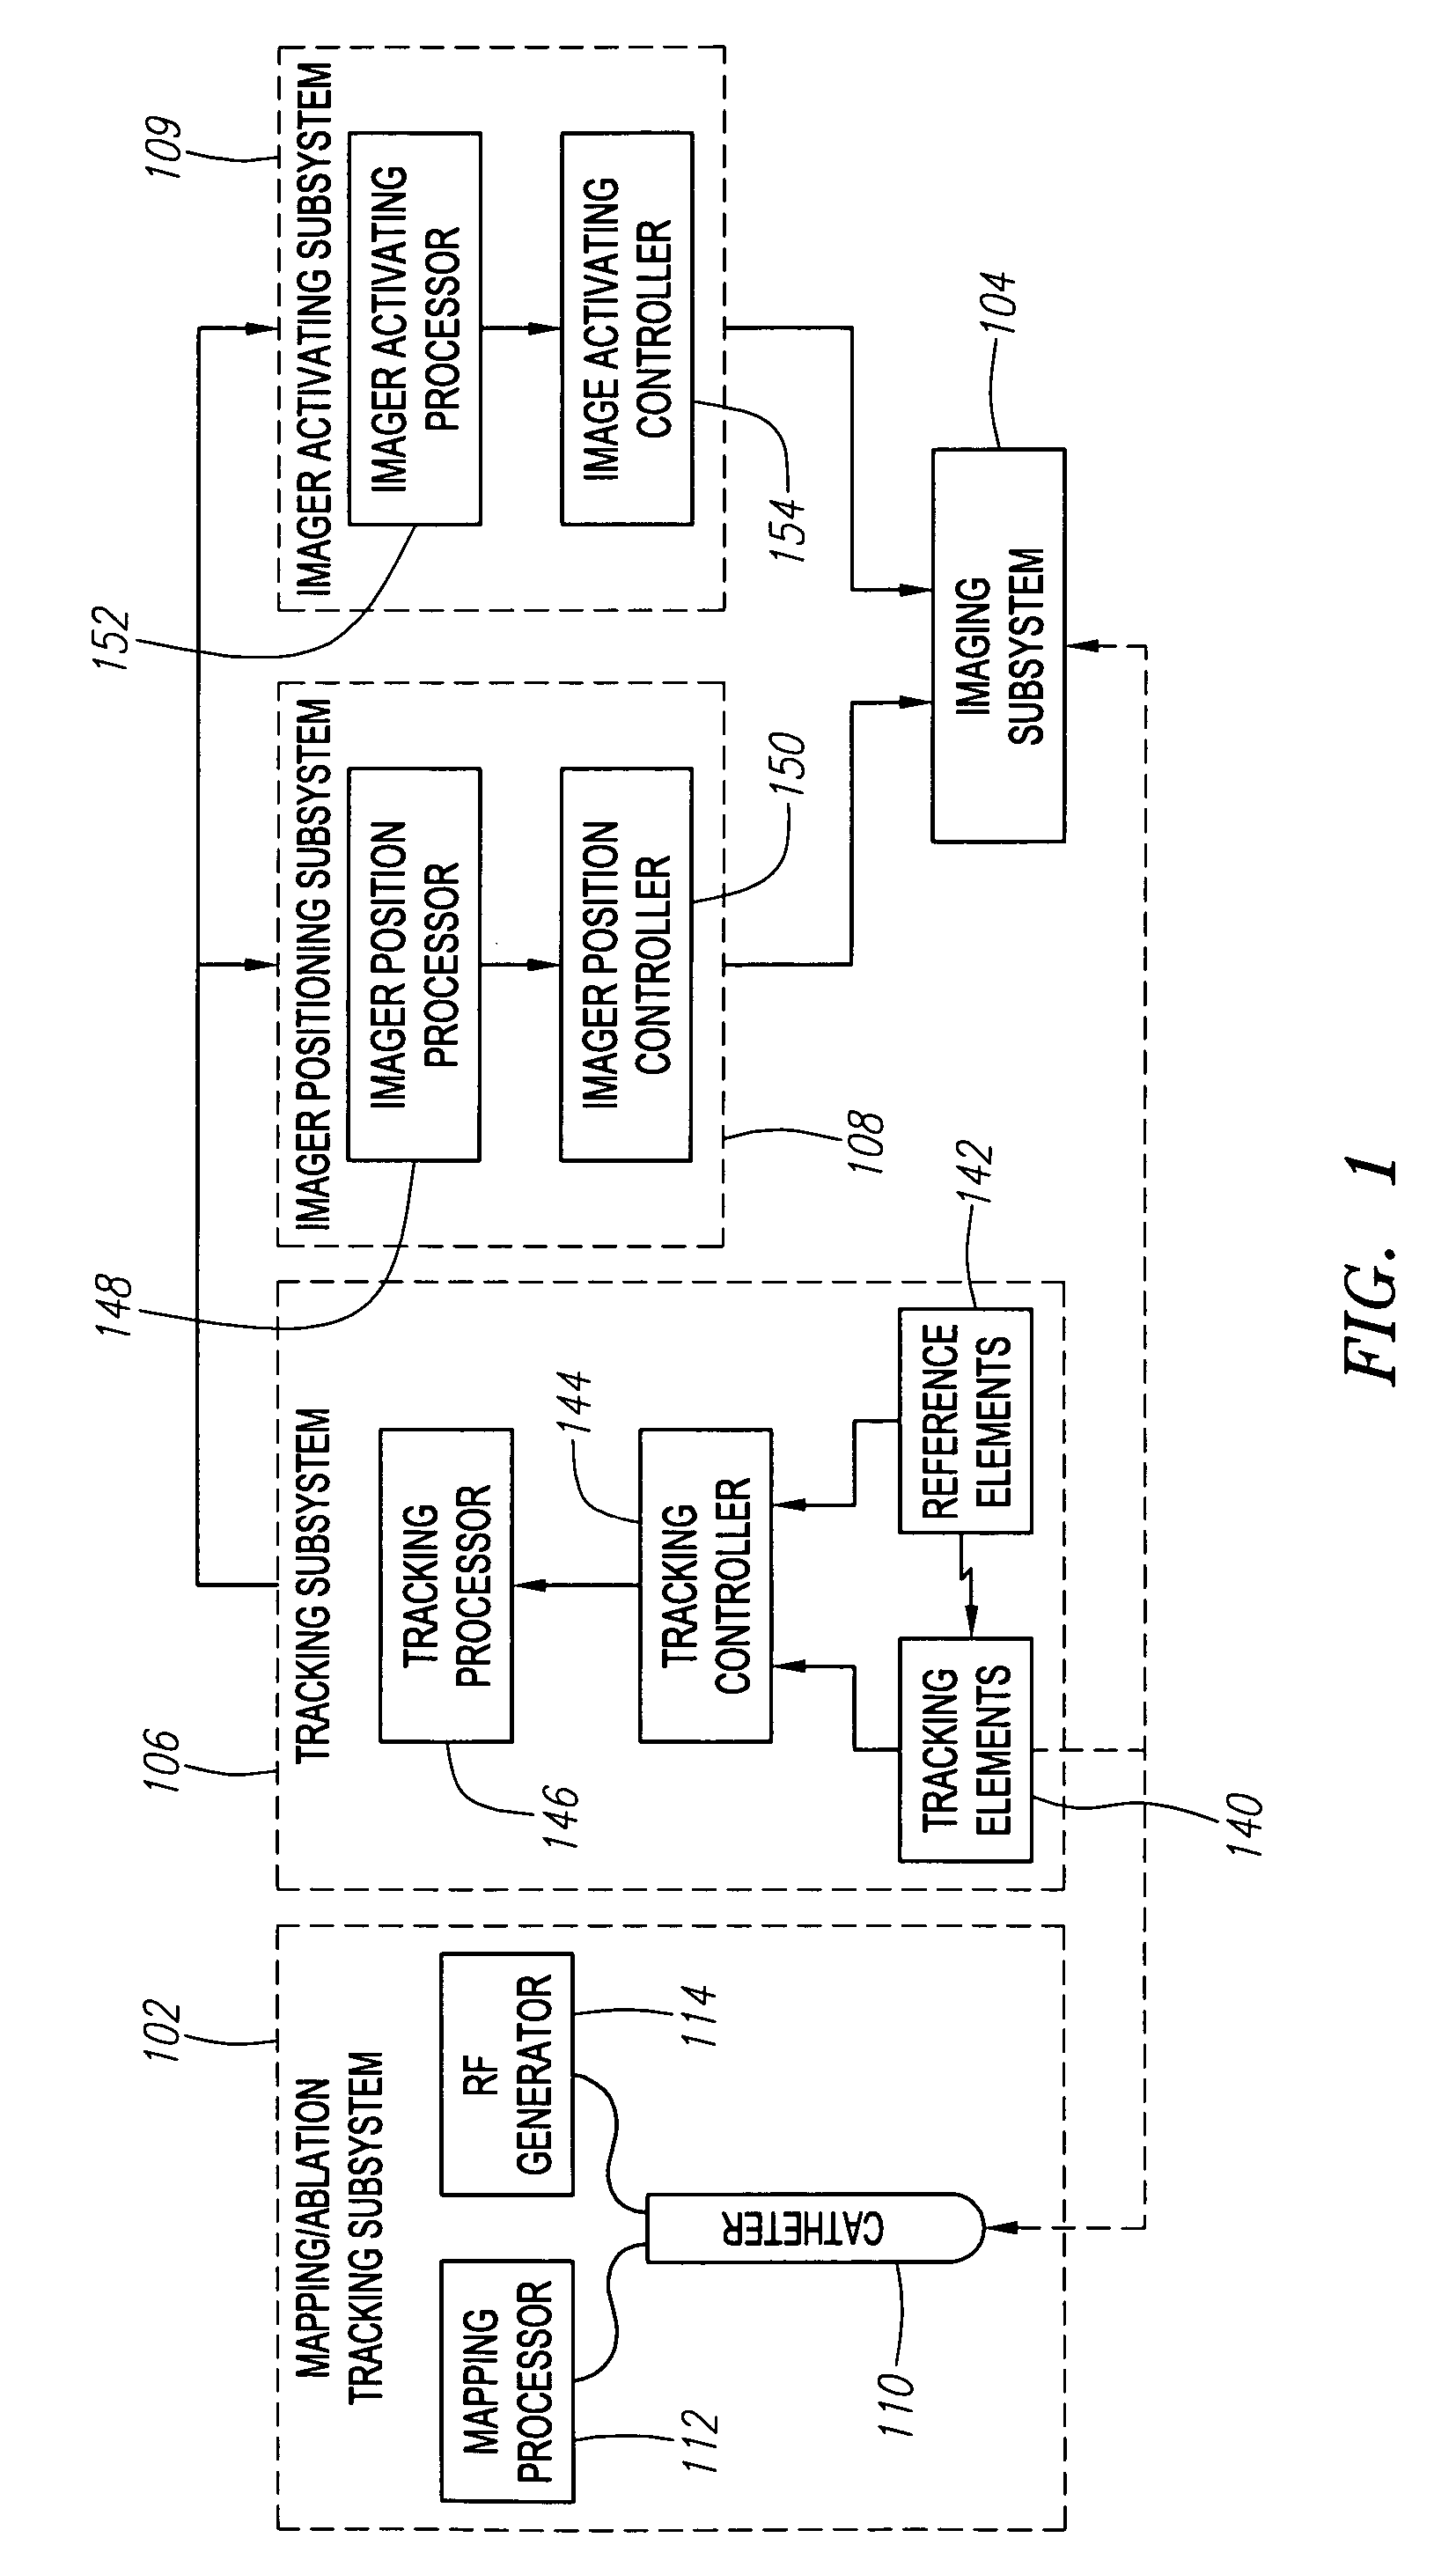 Automated manipulation of imaging device field of view based on tracked medical device position